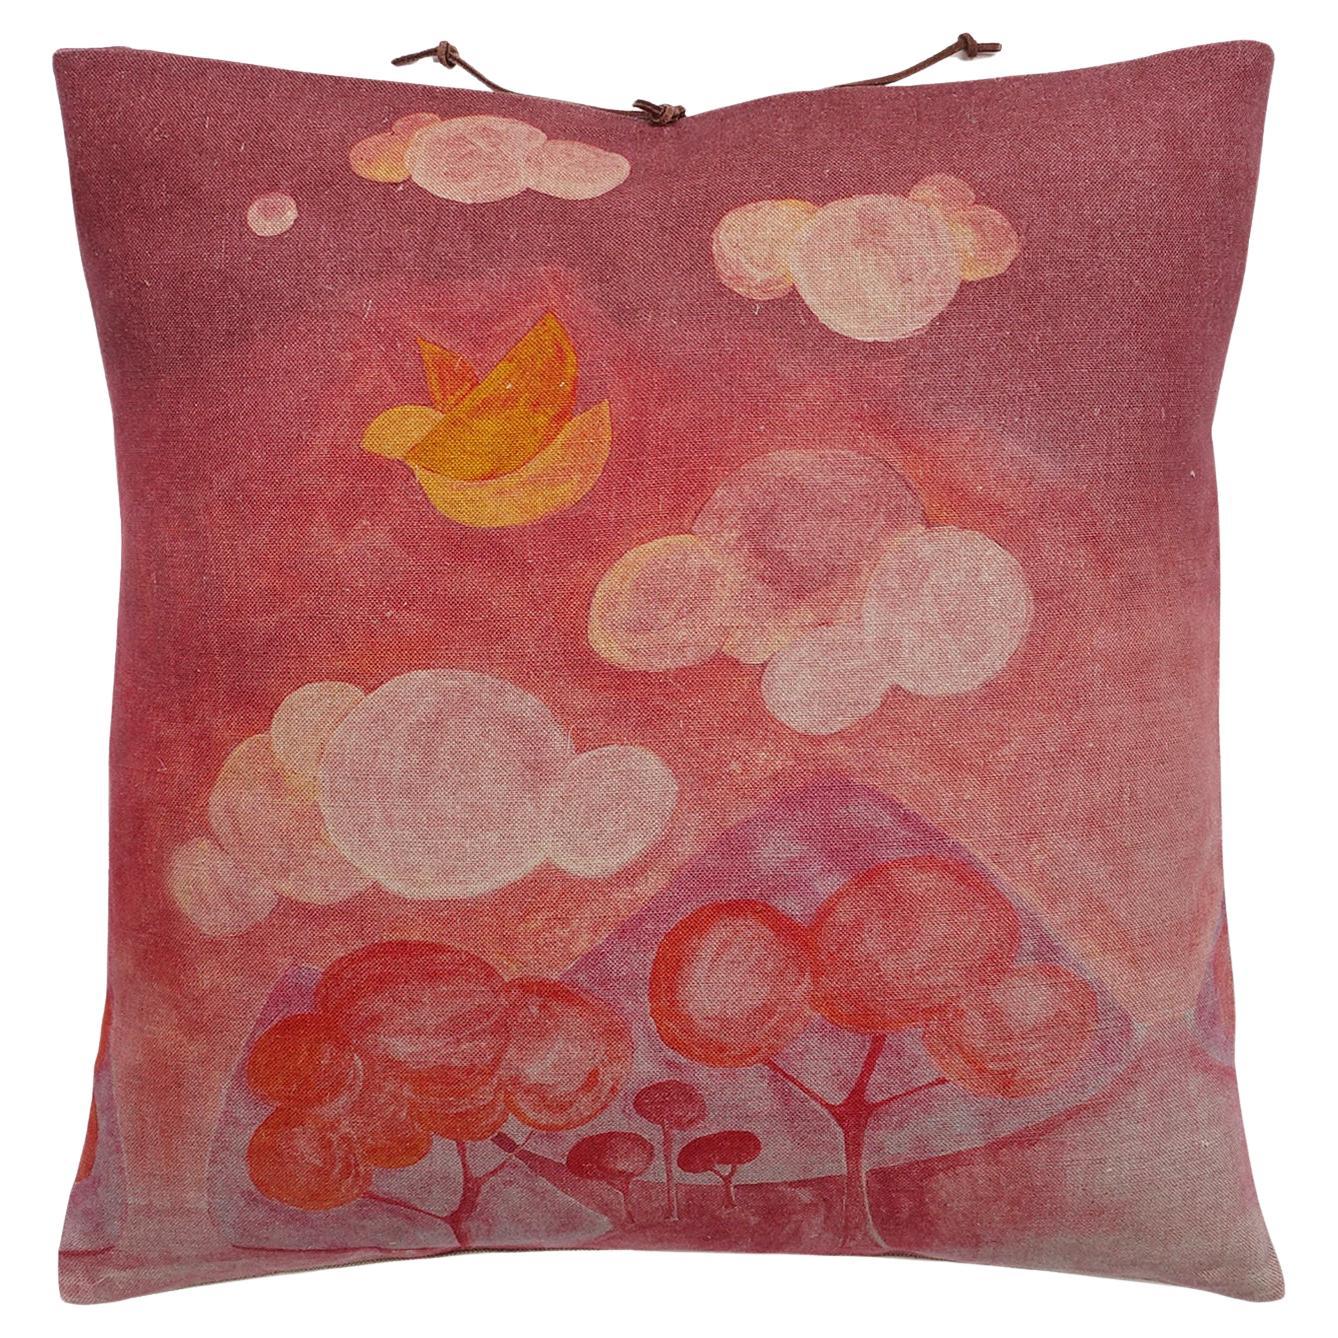 Printed Linen Pillow Happy Place Rose